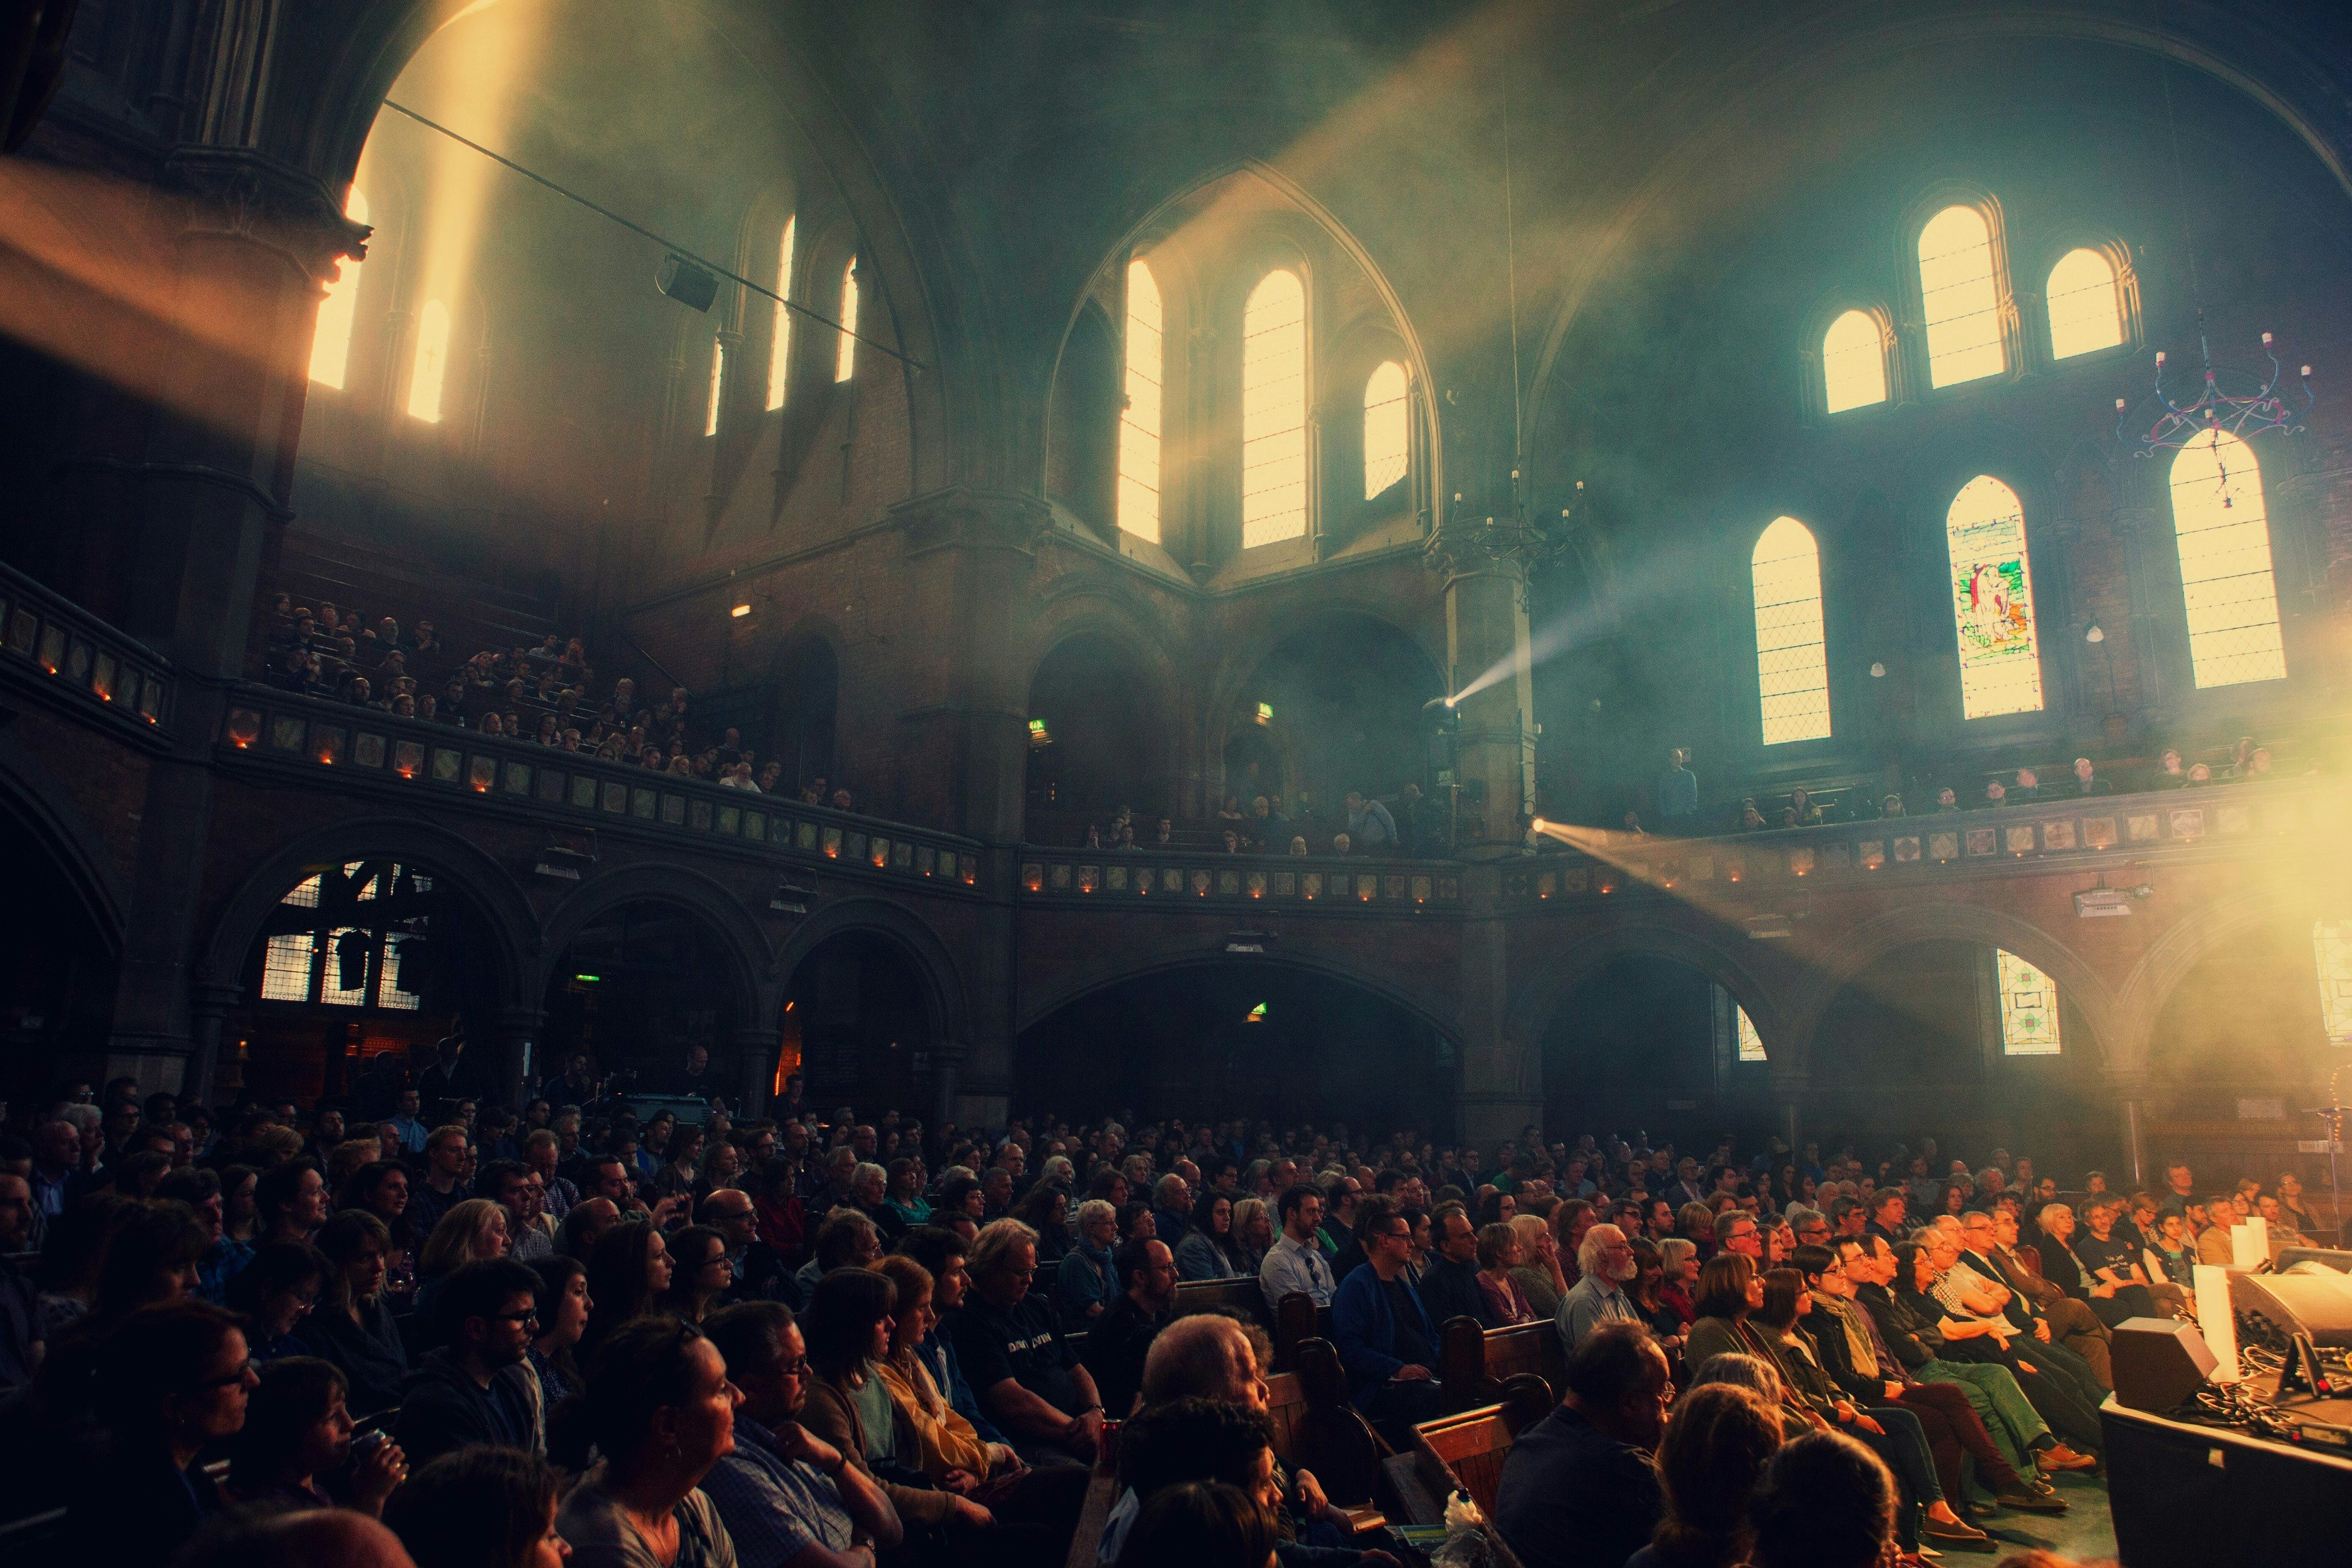 The audience at Union Chapel, a London music venue that is also a working church with stained glass windows.